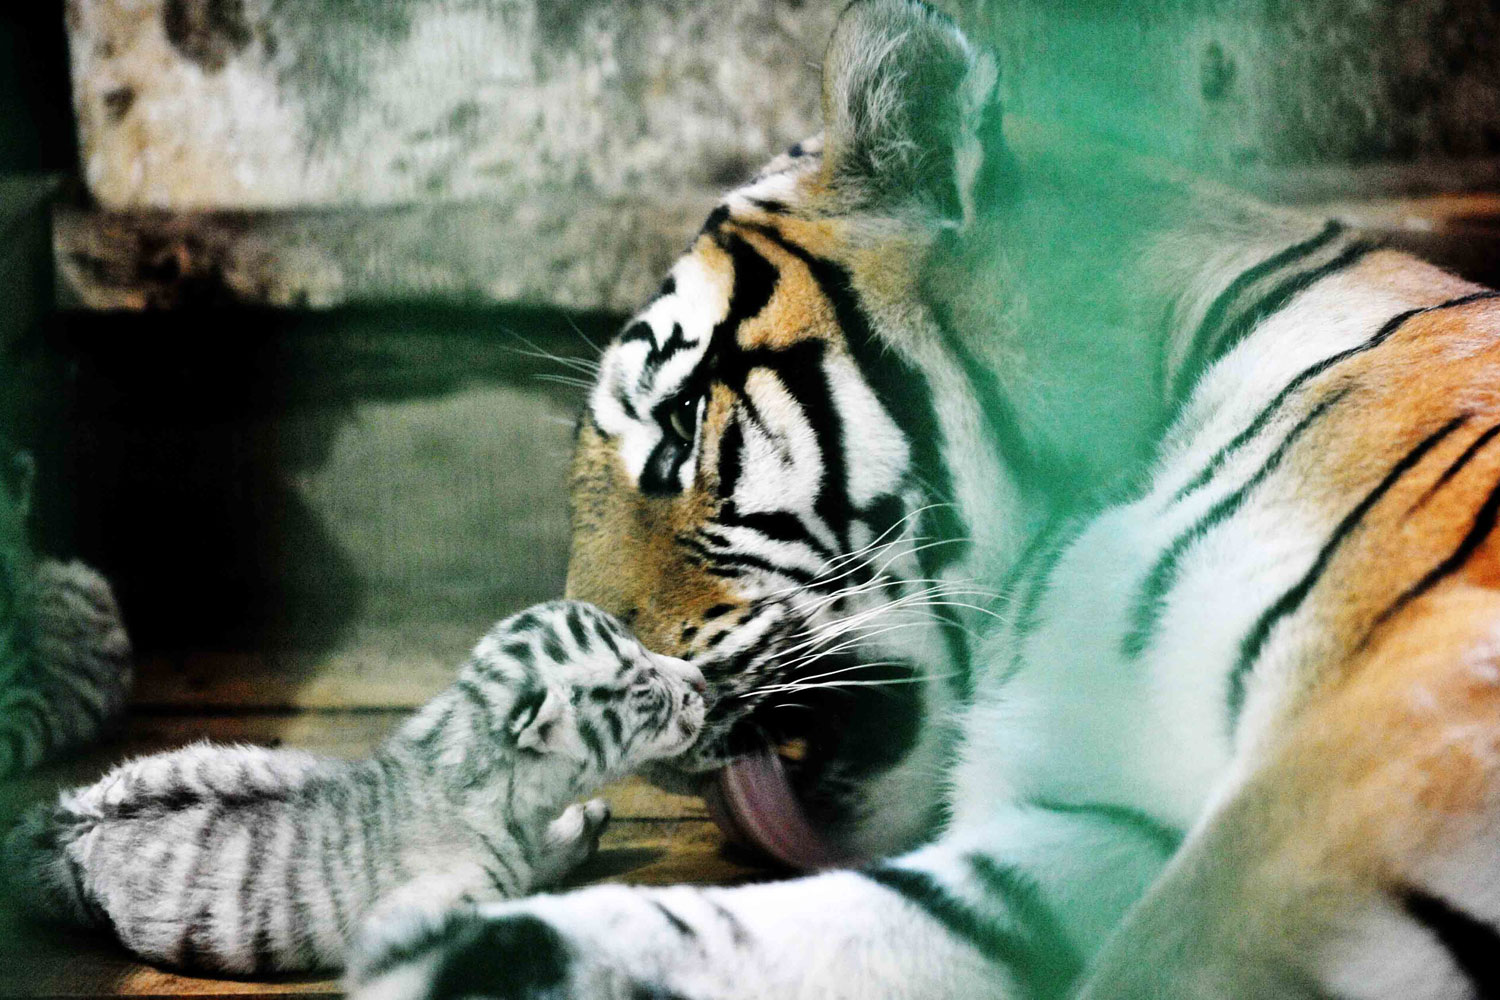 A female Siberian tiger licks a baby Bengali white tiger in the Heilongjiang Siberian Tiger Garden in northeast China's Heilongjiang Province, July 4, 2011. Five baby Bengali white tigers were born on July 1 in the Heilongjiang Siberian Tiger Garden, the world's biggest Siberian tiger garden, which is the first time in the history of the garden. The Siberian tiger is now suckling the five baby tigers for the mother Bengali white tiger is lack of latex.